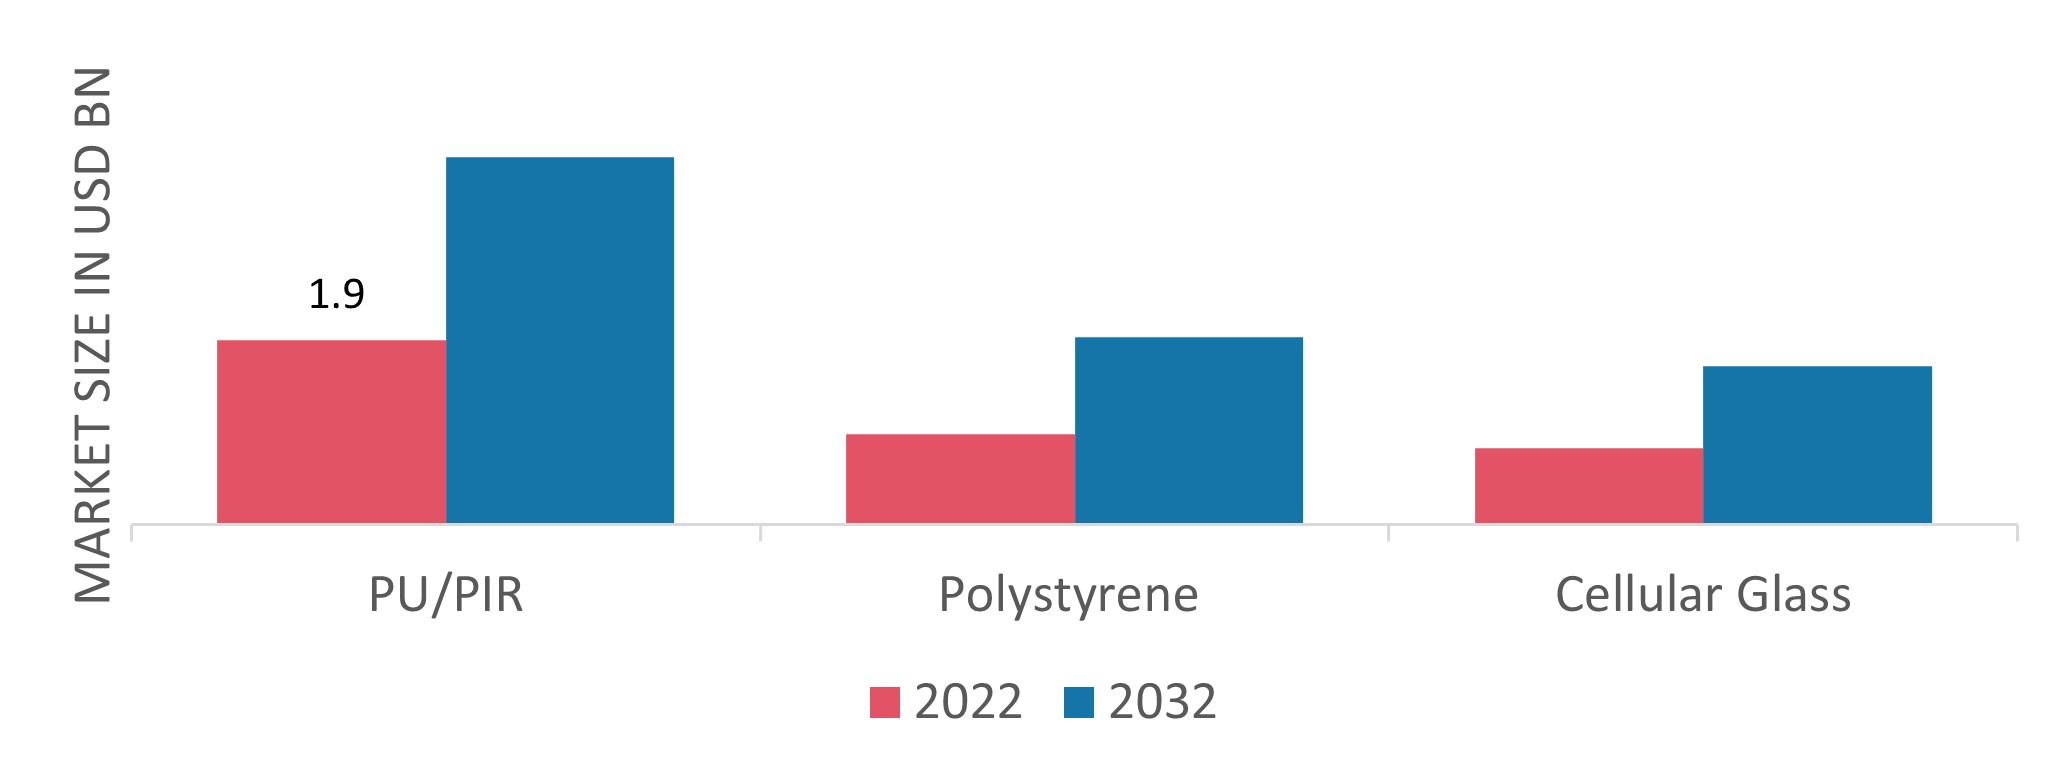 Cryogenic Insulation Market, by Distribution channel, 2022 & 2032